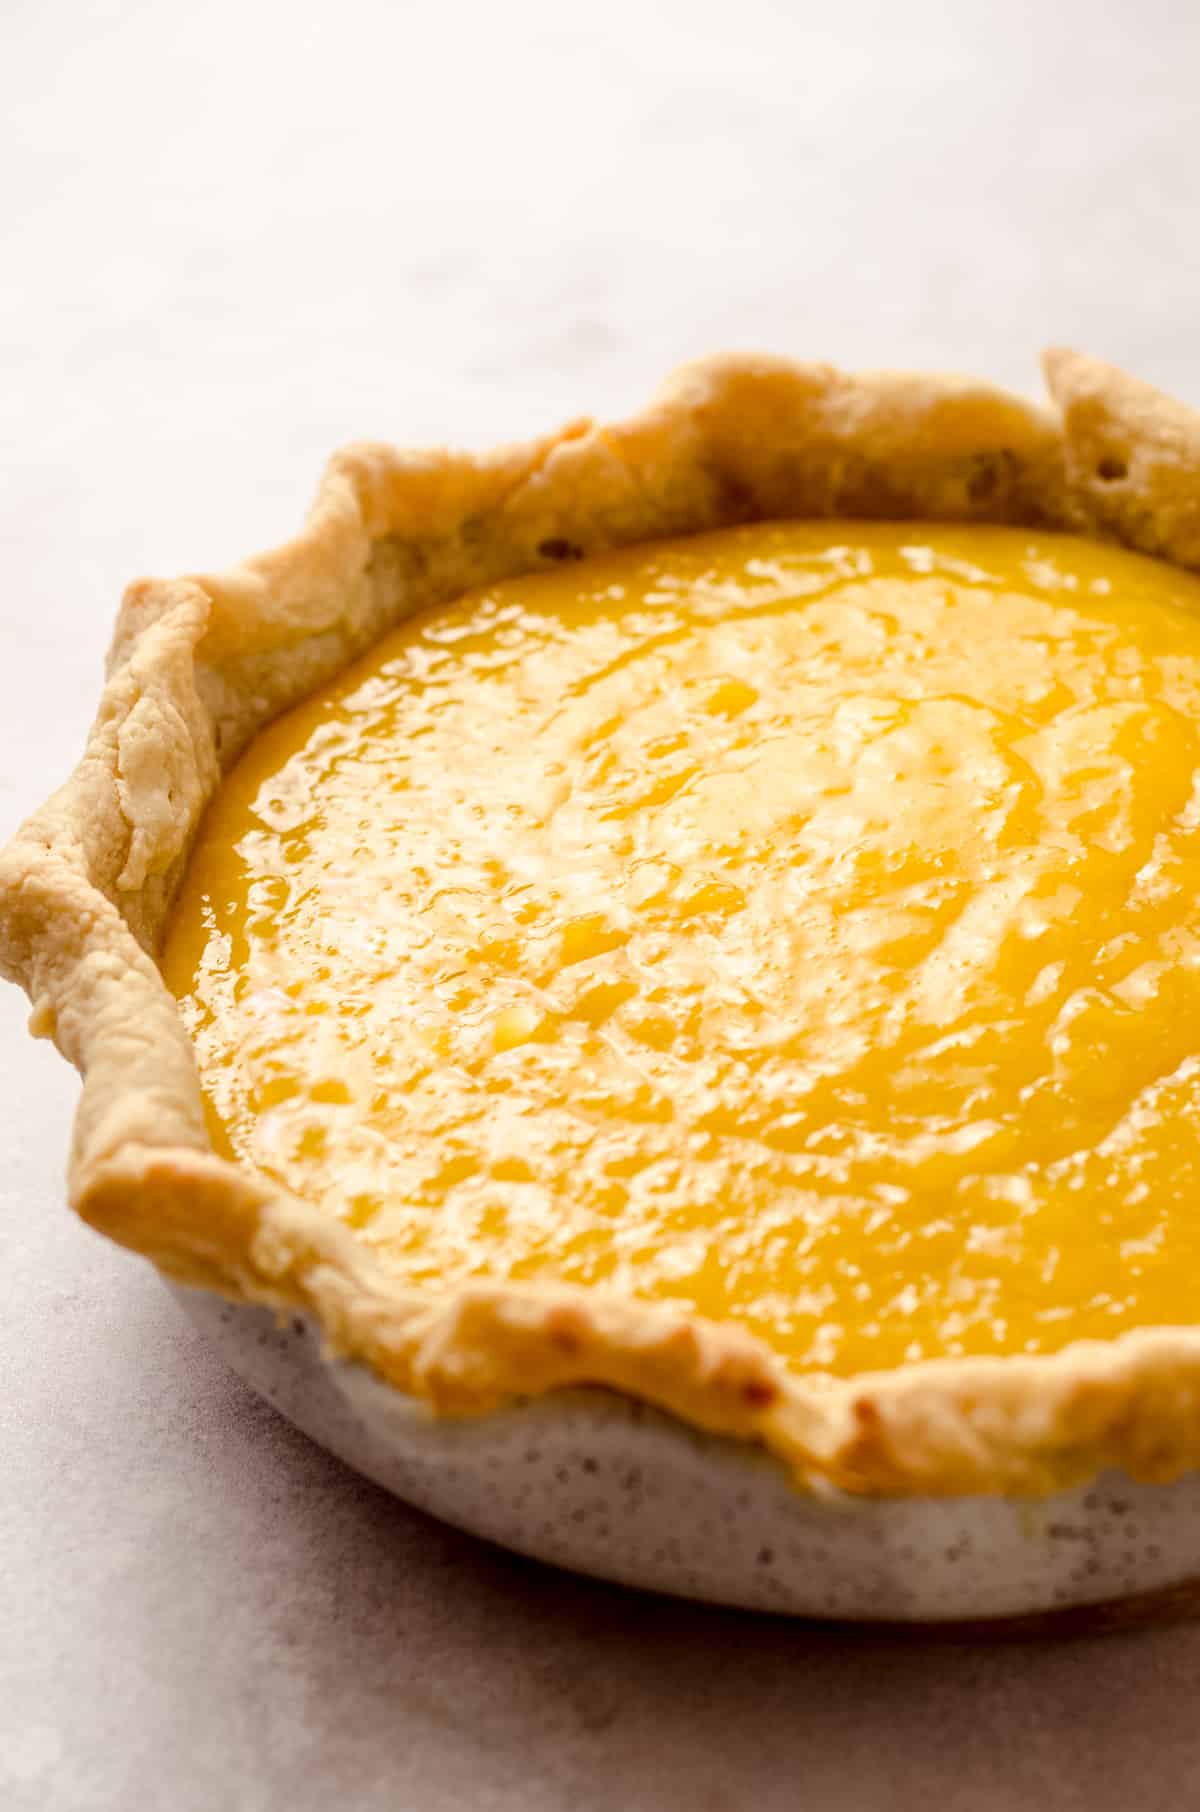 A pie crust that has been filled with a homemade lemon curd.